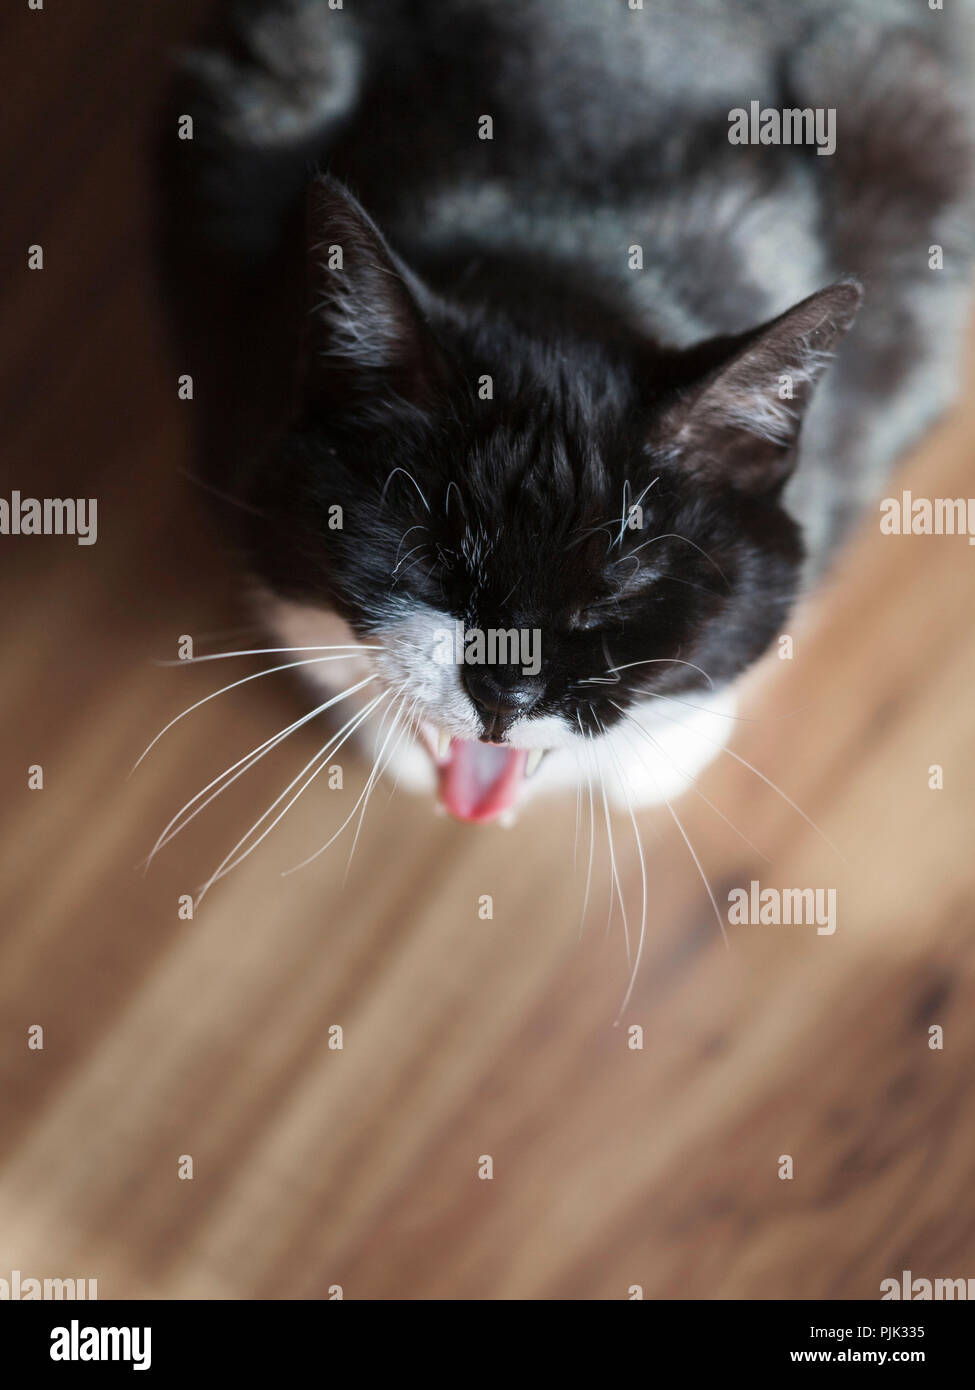 Cat yawning and grimacing, Stock Photo